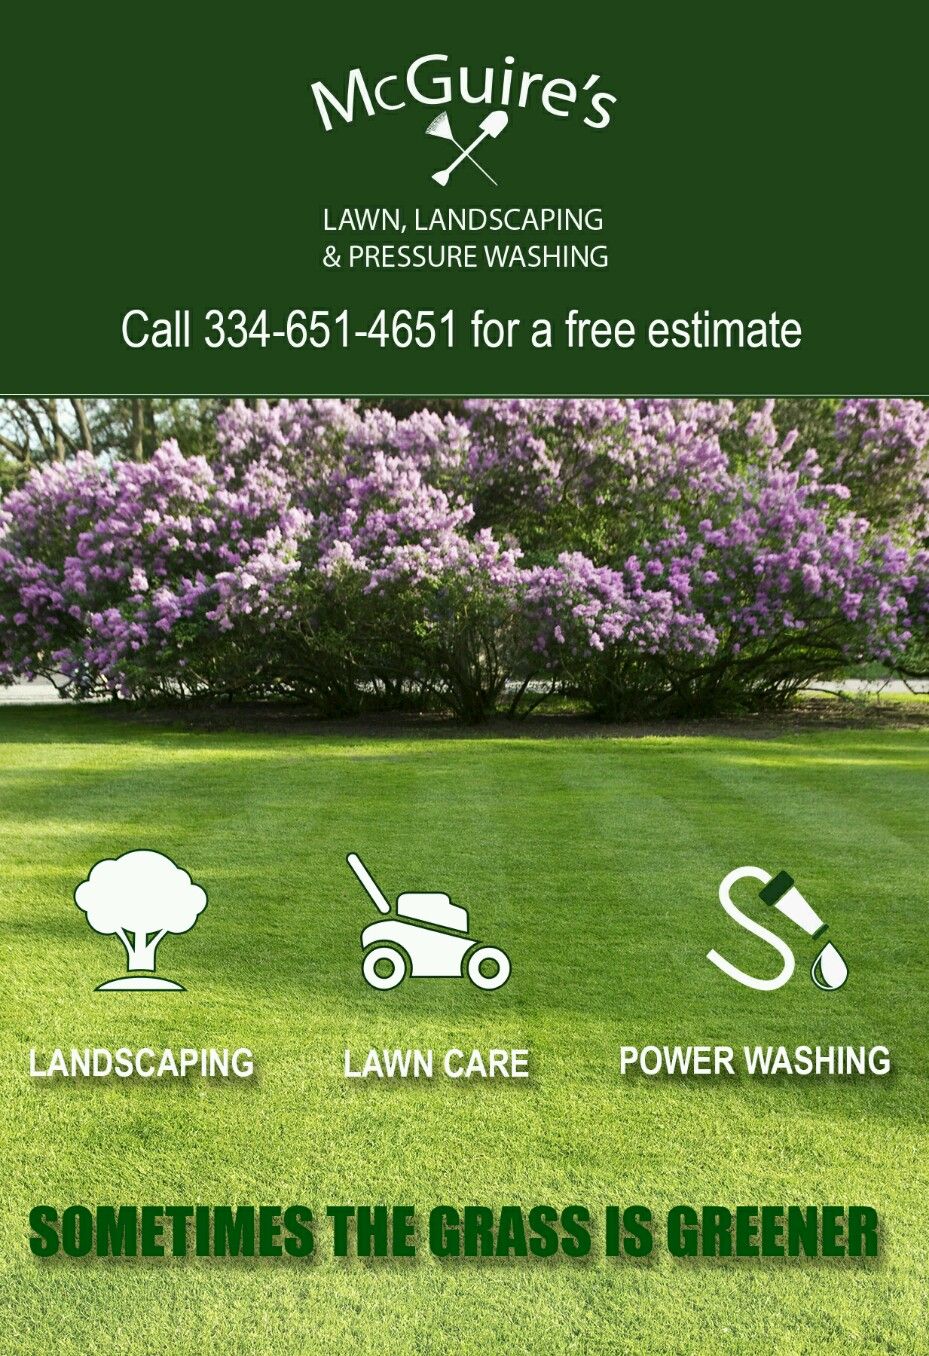 McGuire's Lawn, Landscaping & Pressure Washing